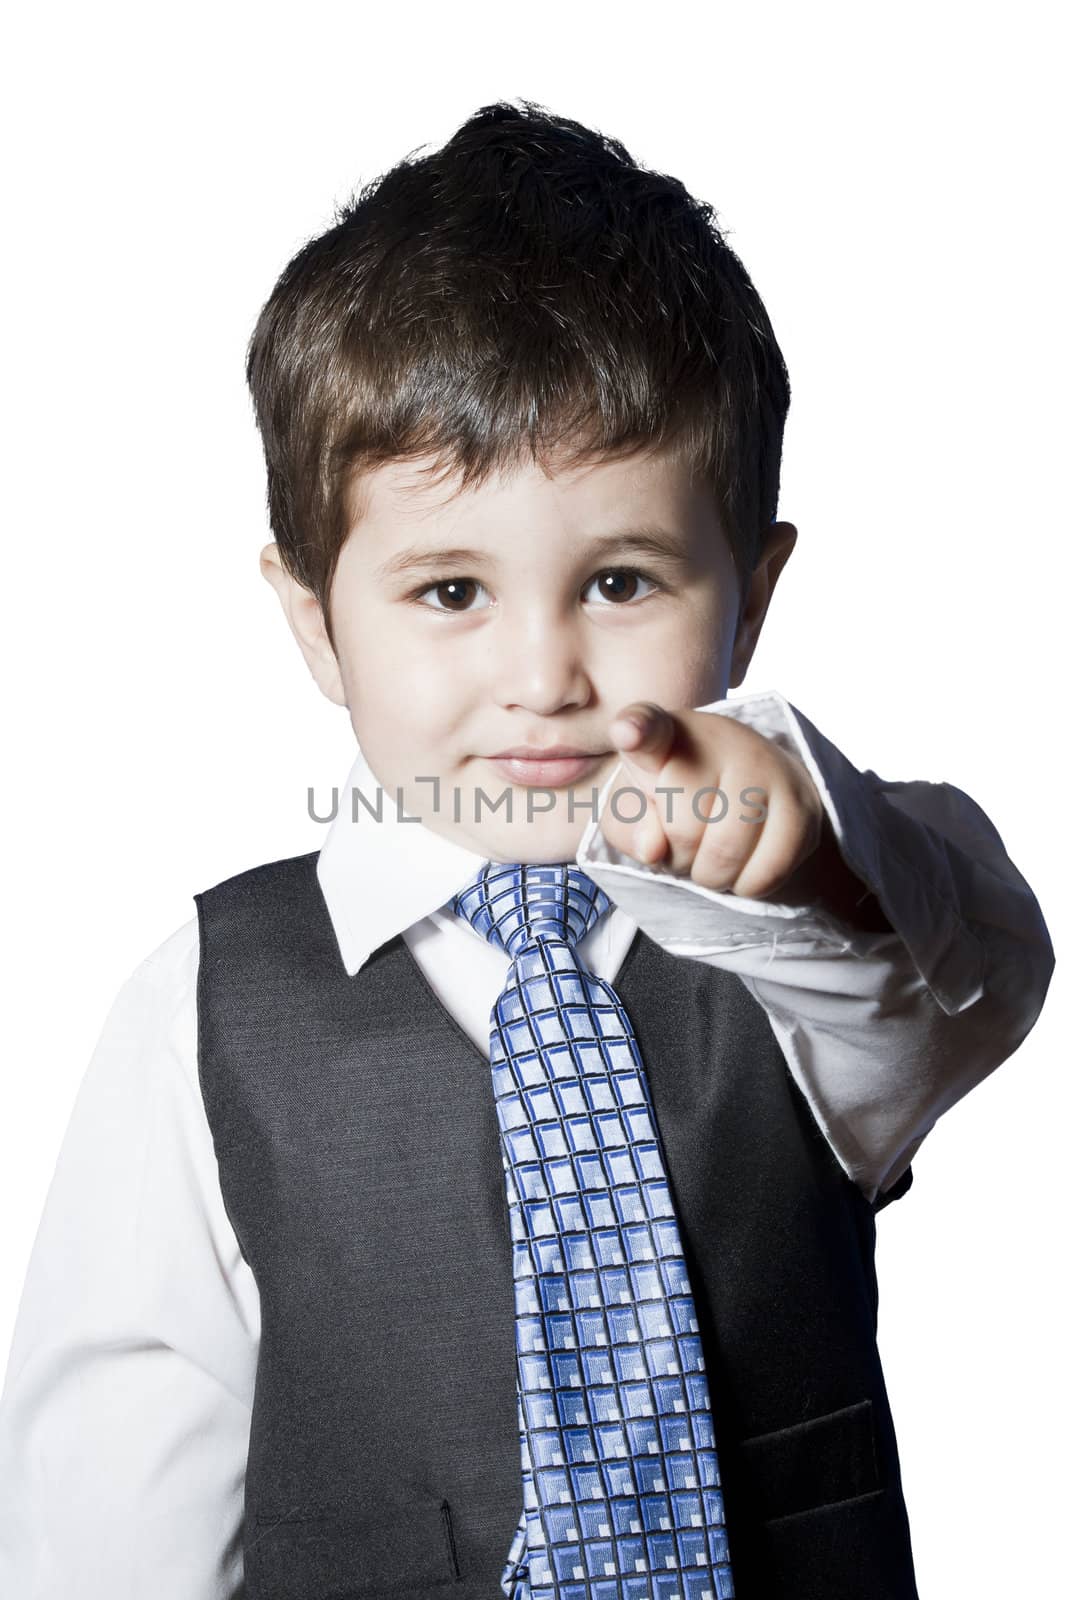 A small boy in the studio, dressed up in a suit and pretending to be a businessman.